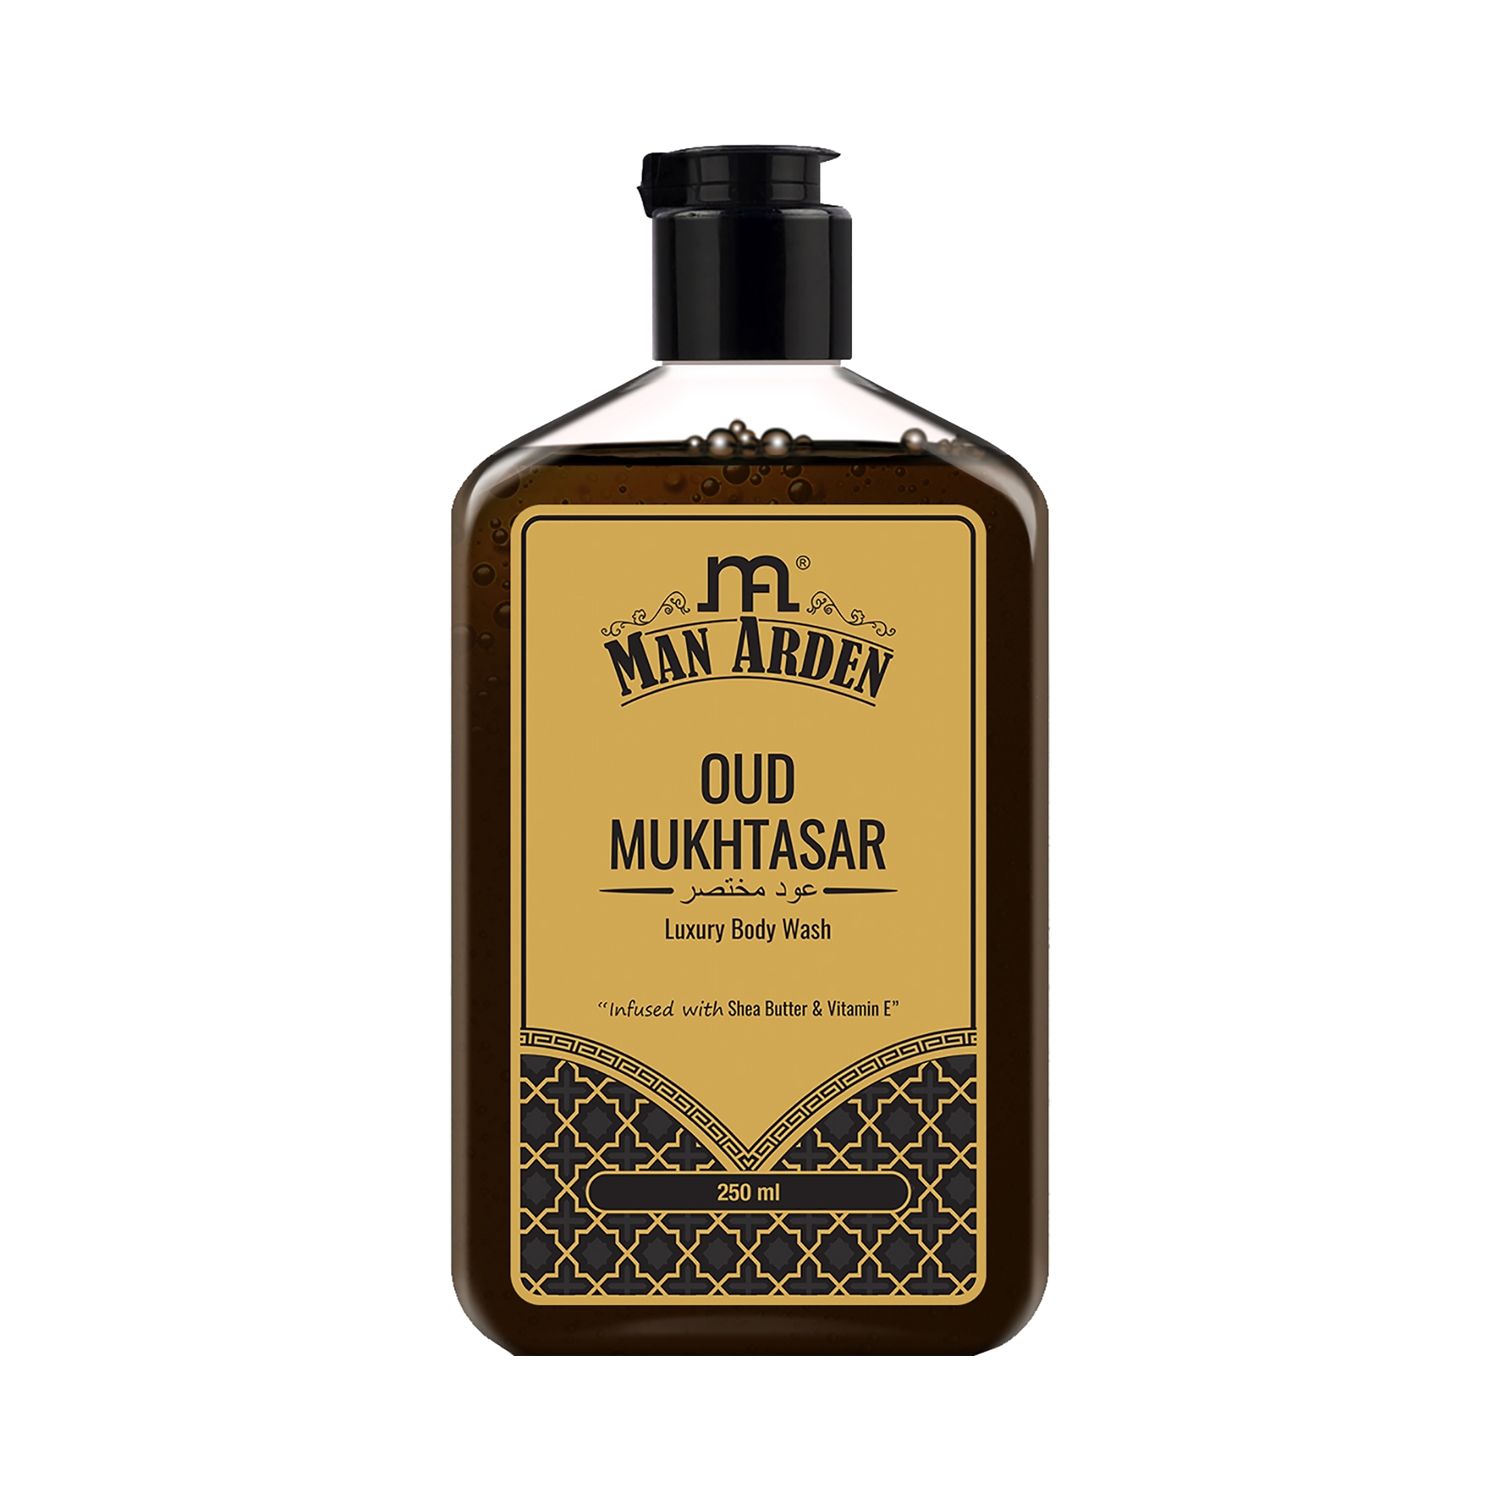 Man Arden | Man Arden Oud Mukhtasar Luxury Body Wash Infused With Shea Butter & Vitamin E (250ml)